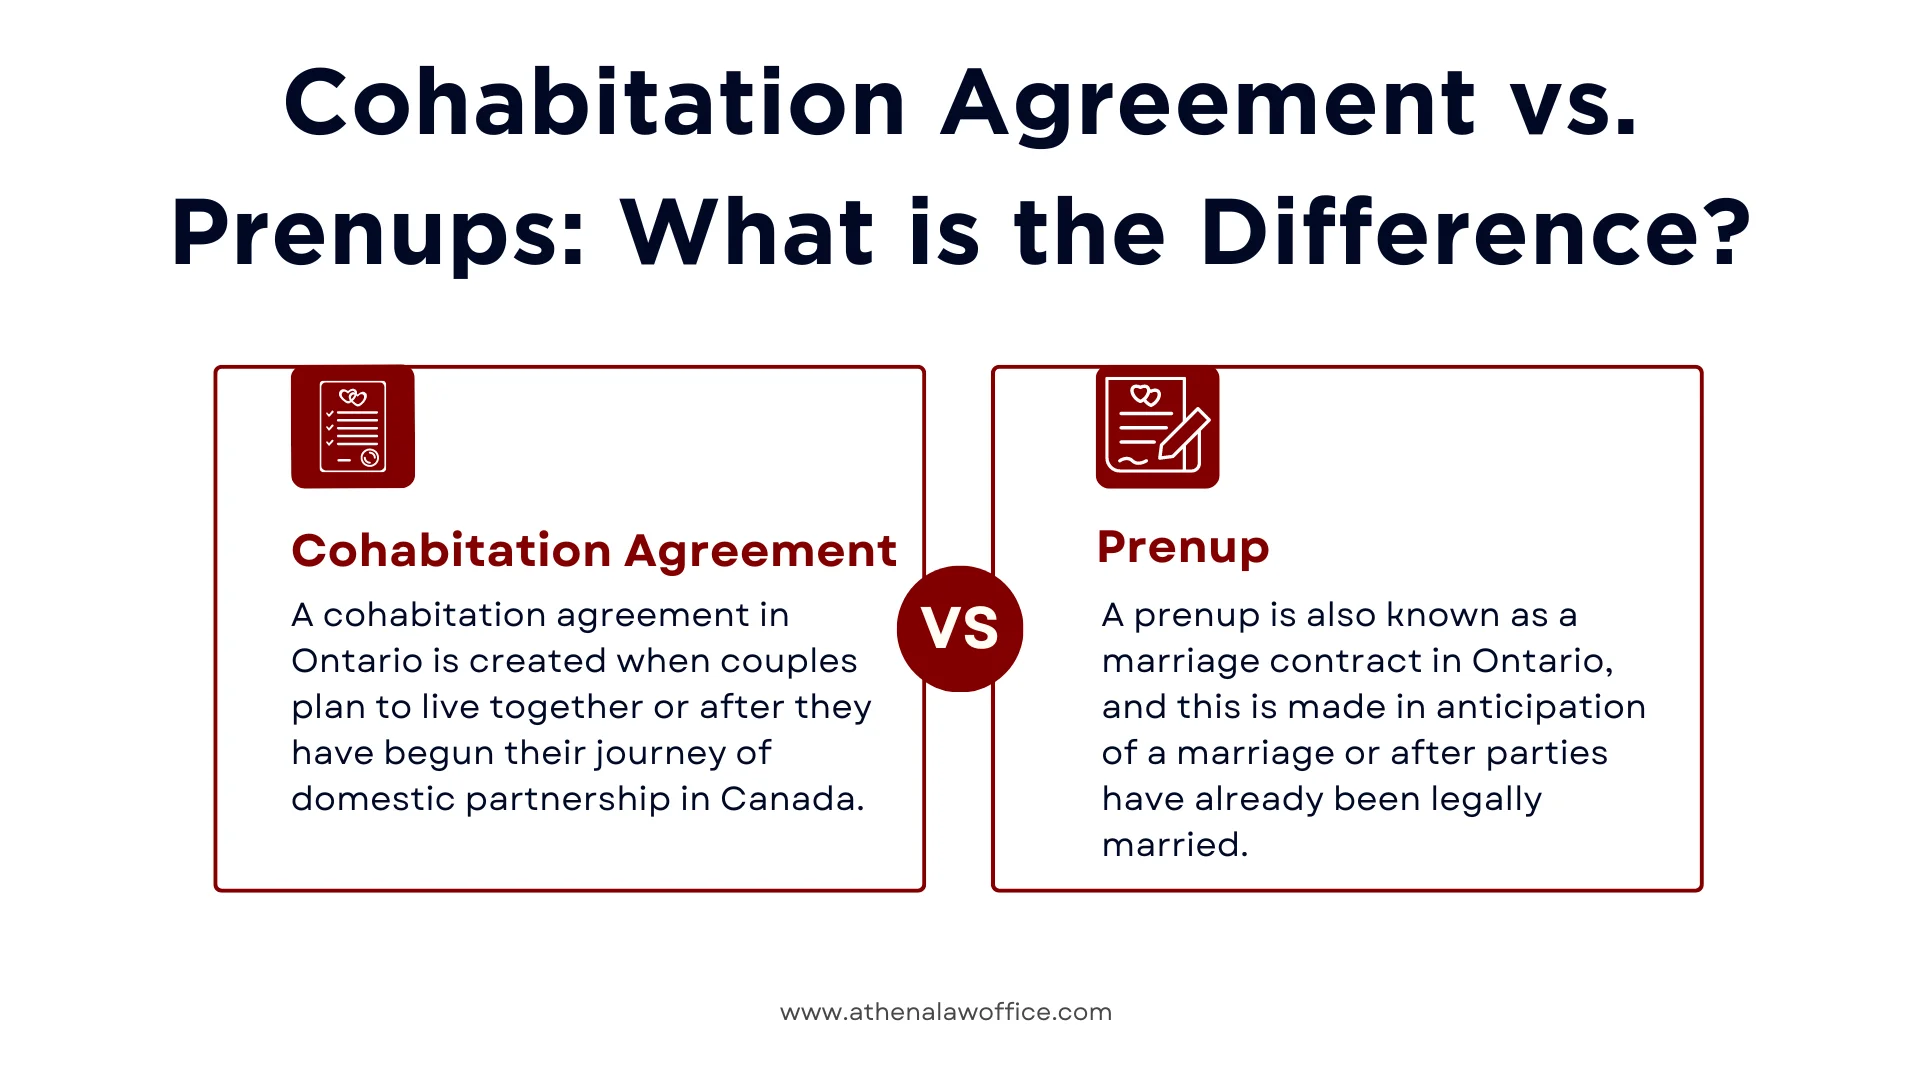 An infographic on the difference between cohabitation agreement vs prenup